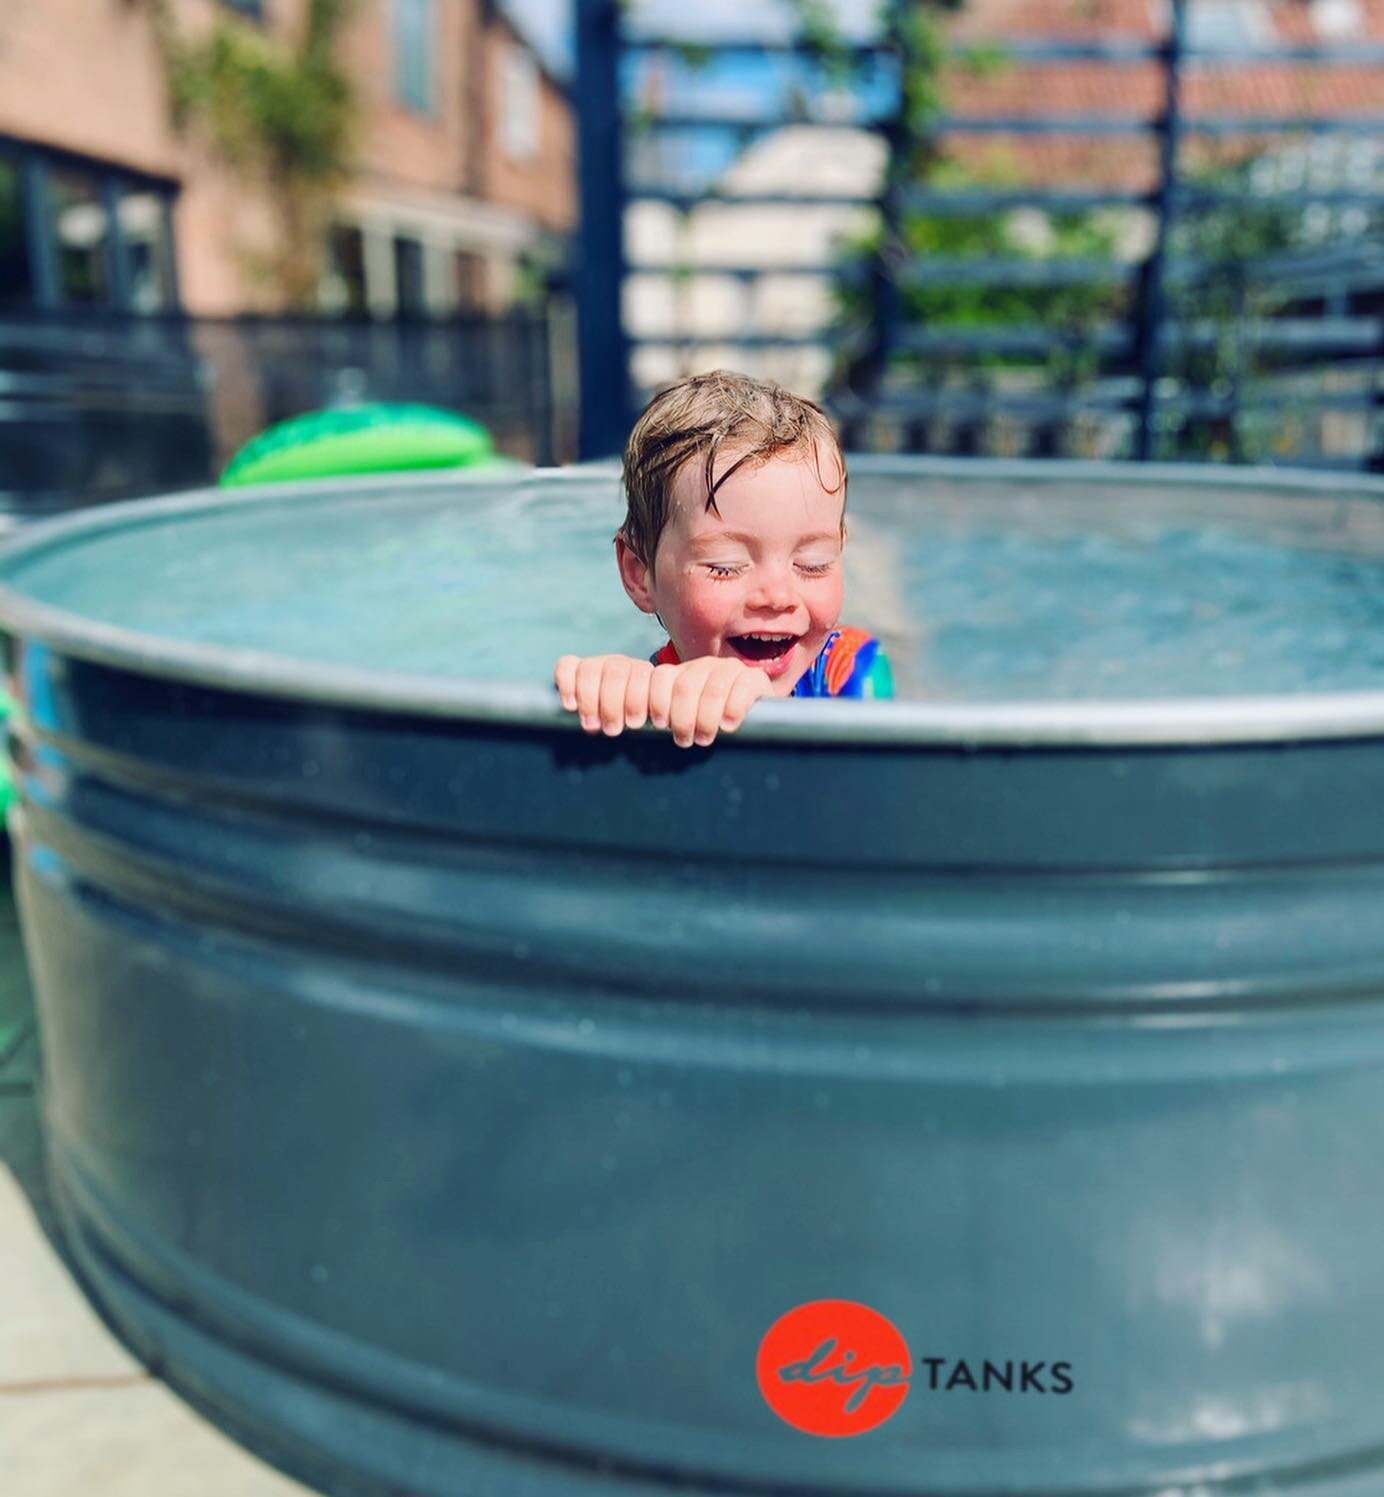 It half term&hellip;and we have sun! 👏 

Why do kids love playing in water so much? Just what is it about playing in water that makes it so appealing? 

&ldquo;There are eight sensory categories and water play involves three &mdash; auditory, visual